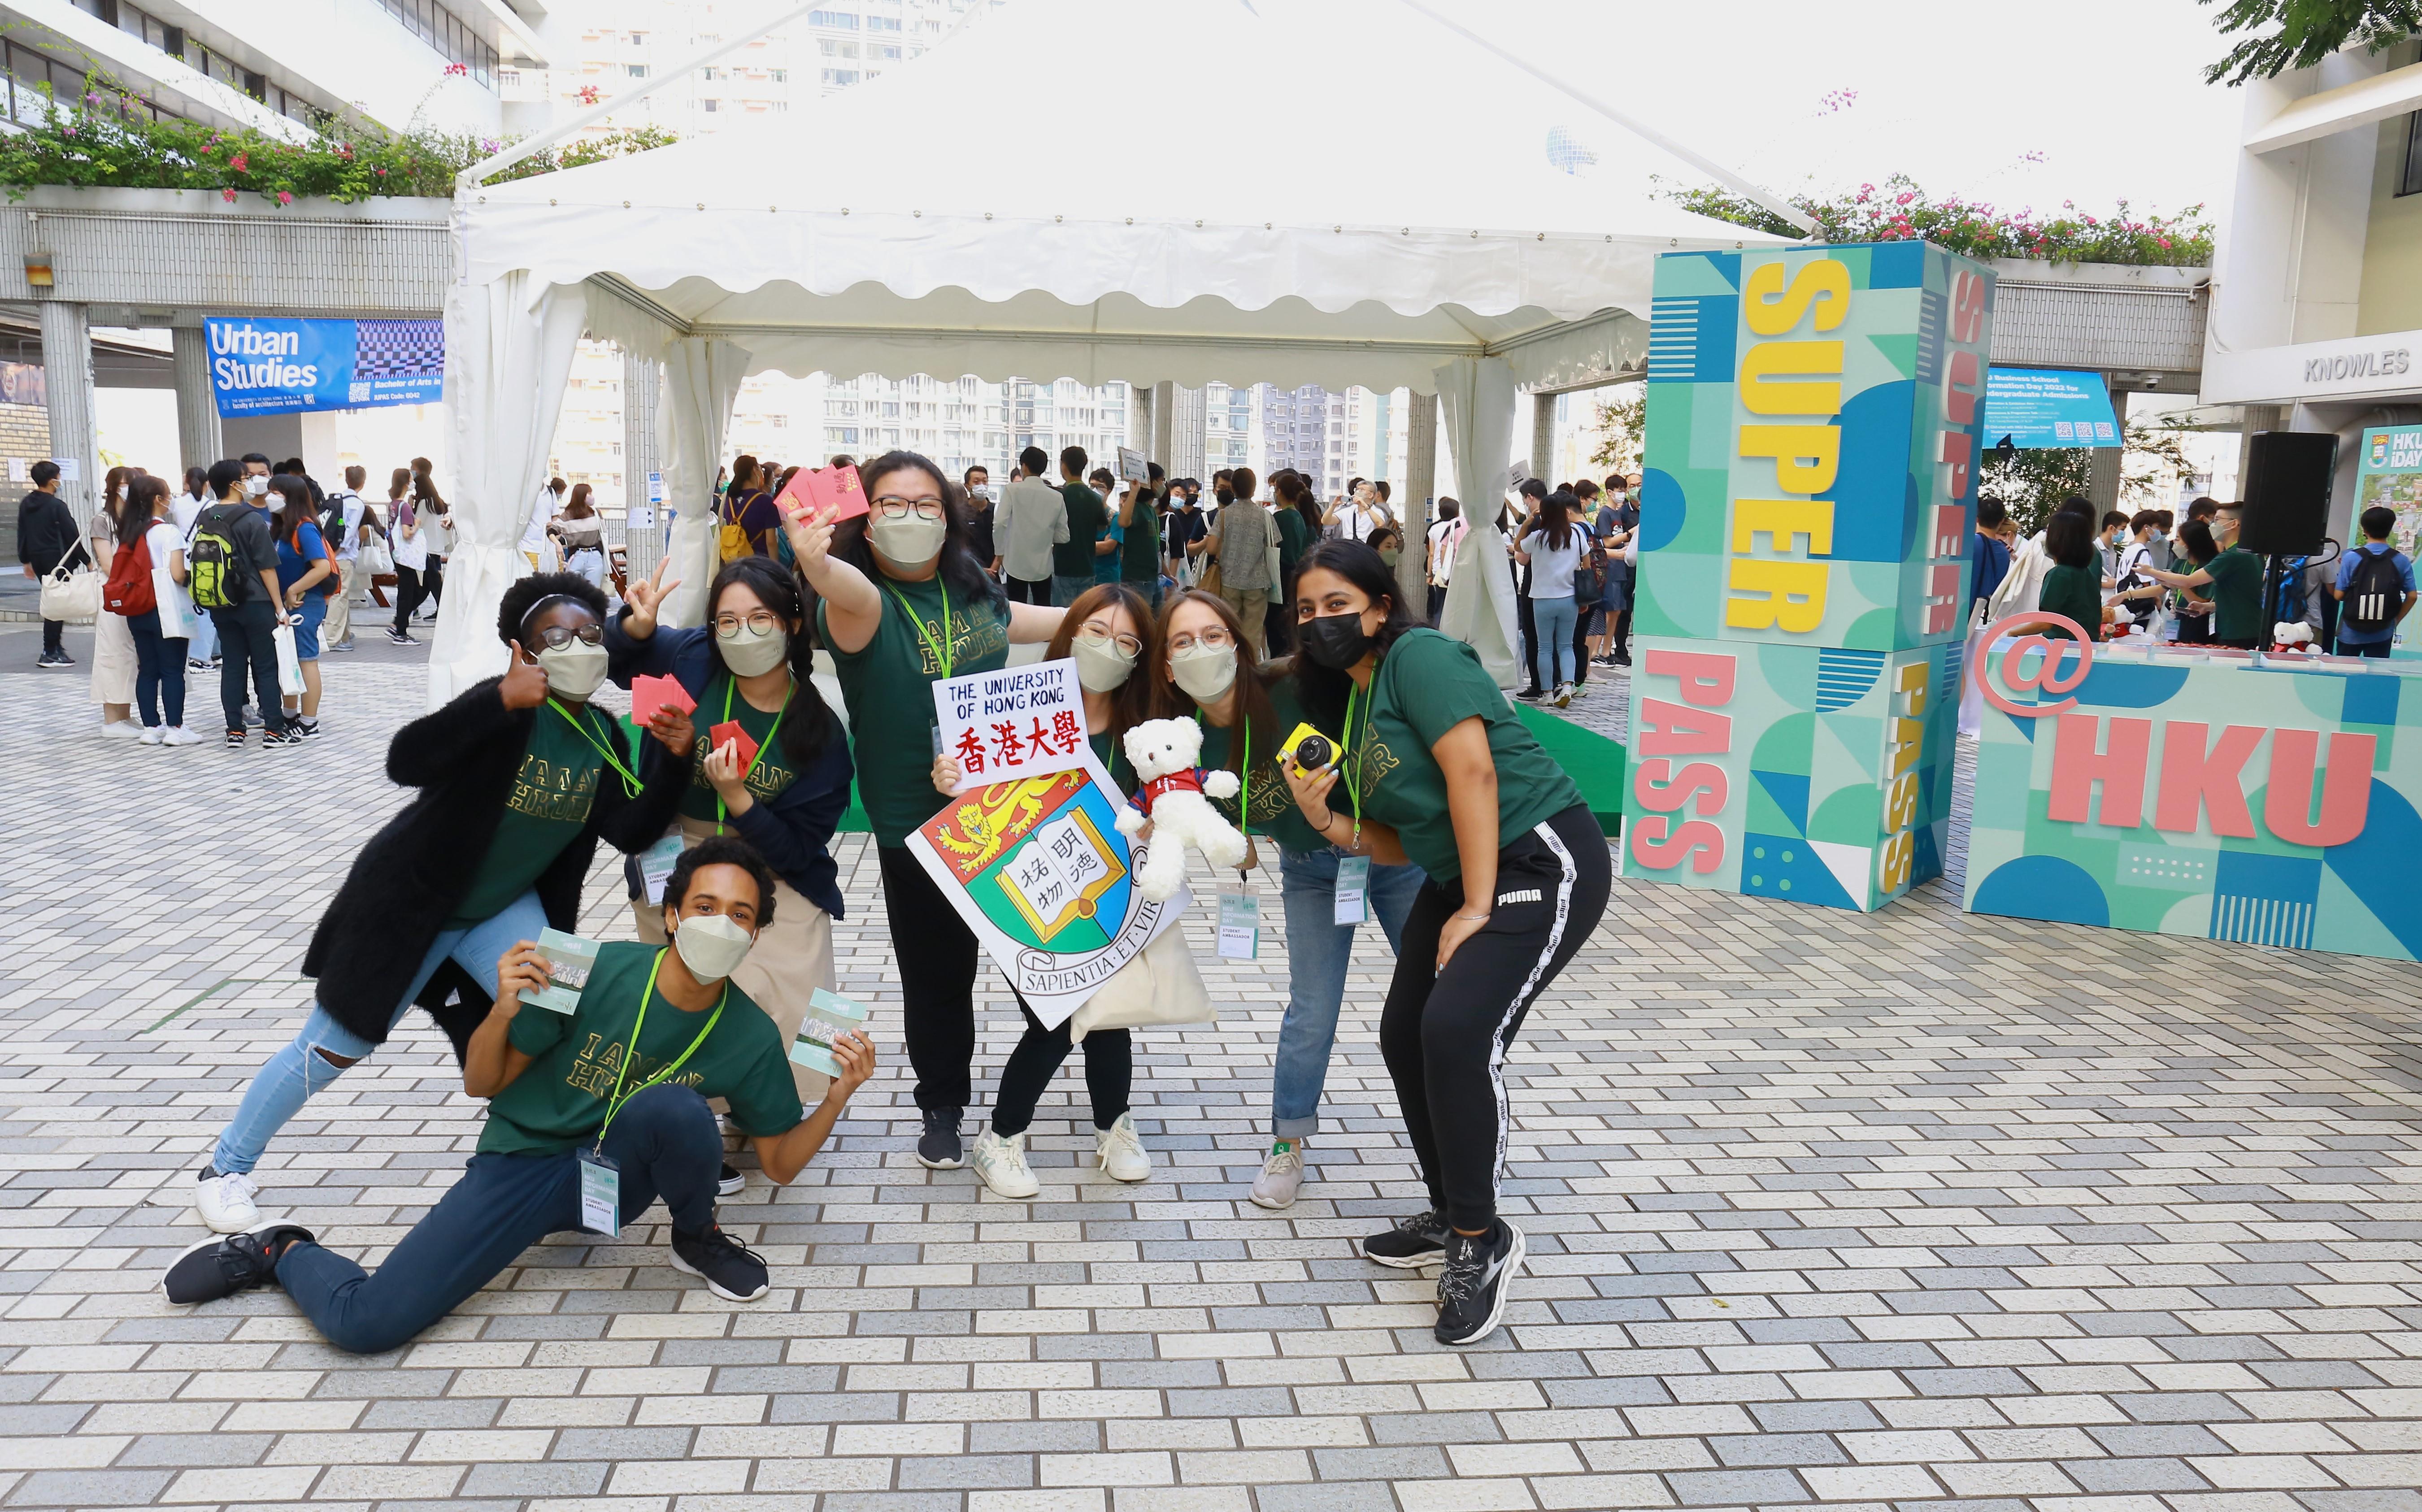 Students ambassadors are posing in front of SUPERPASS Booth at HKU Information Day